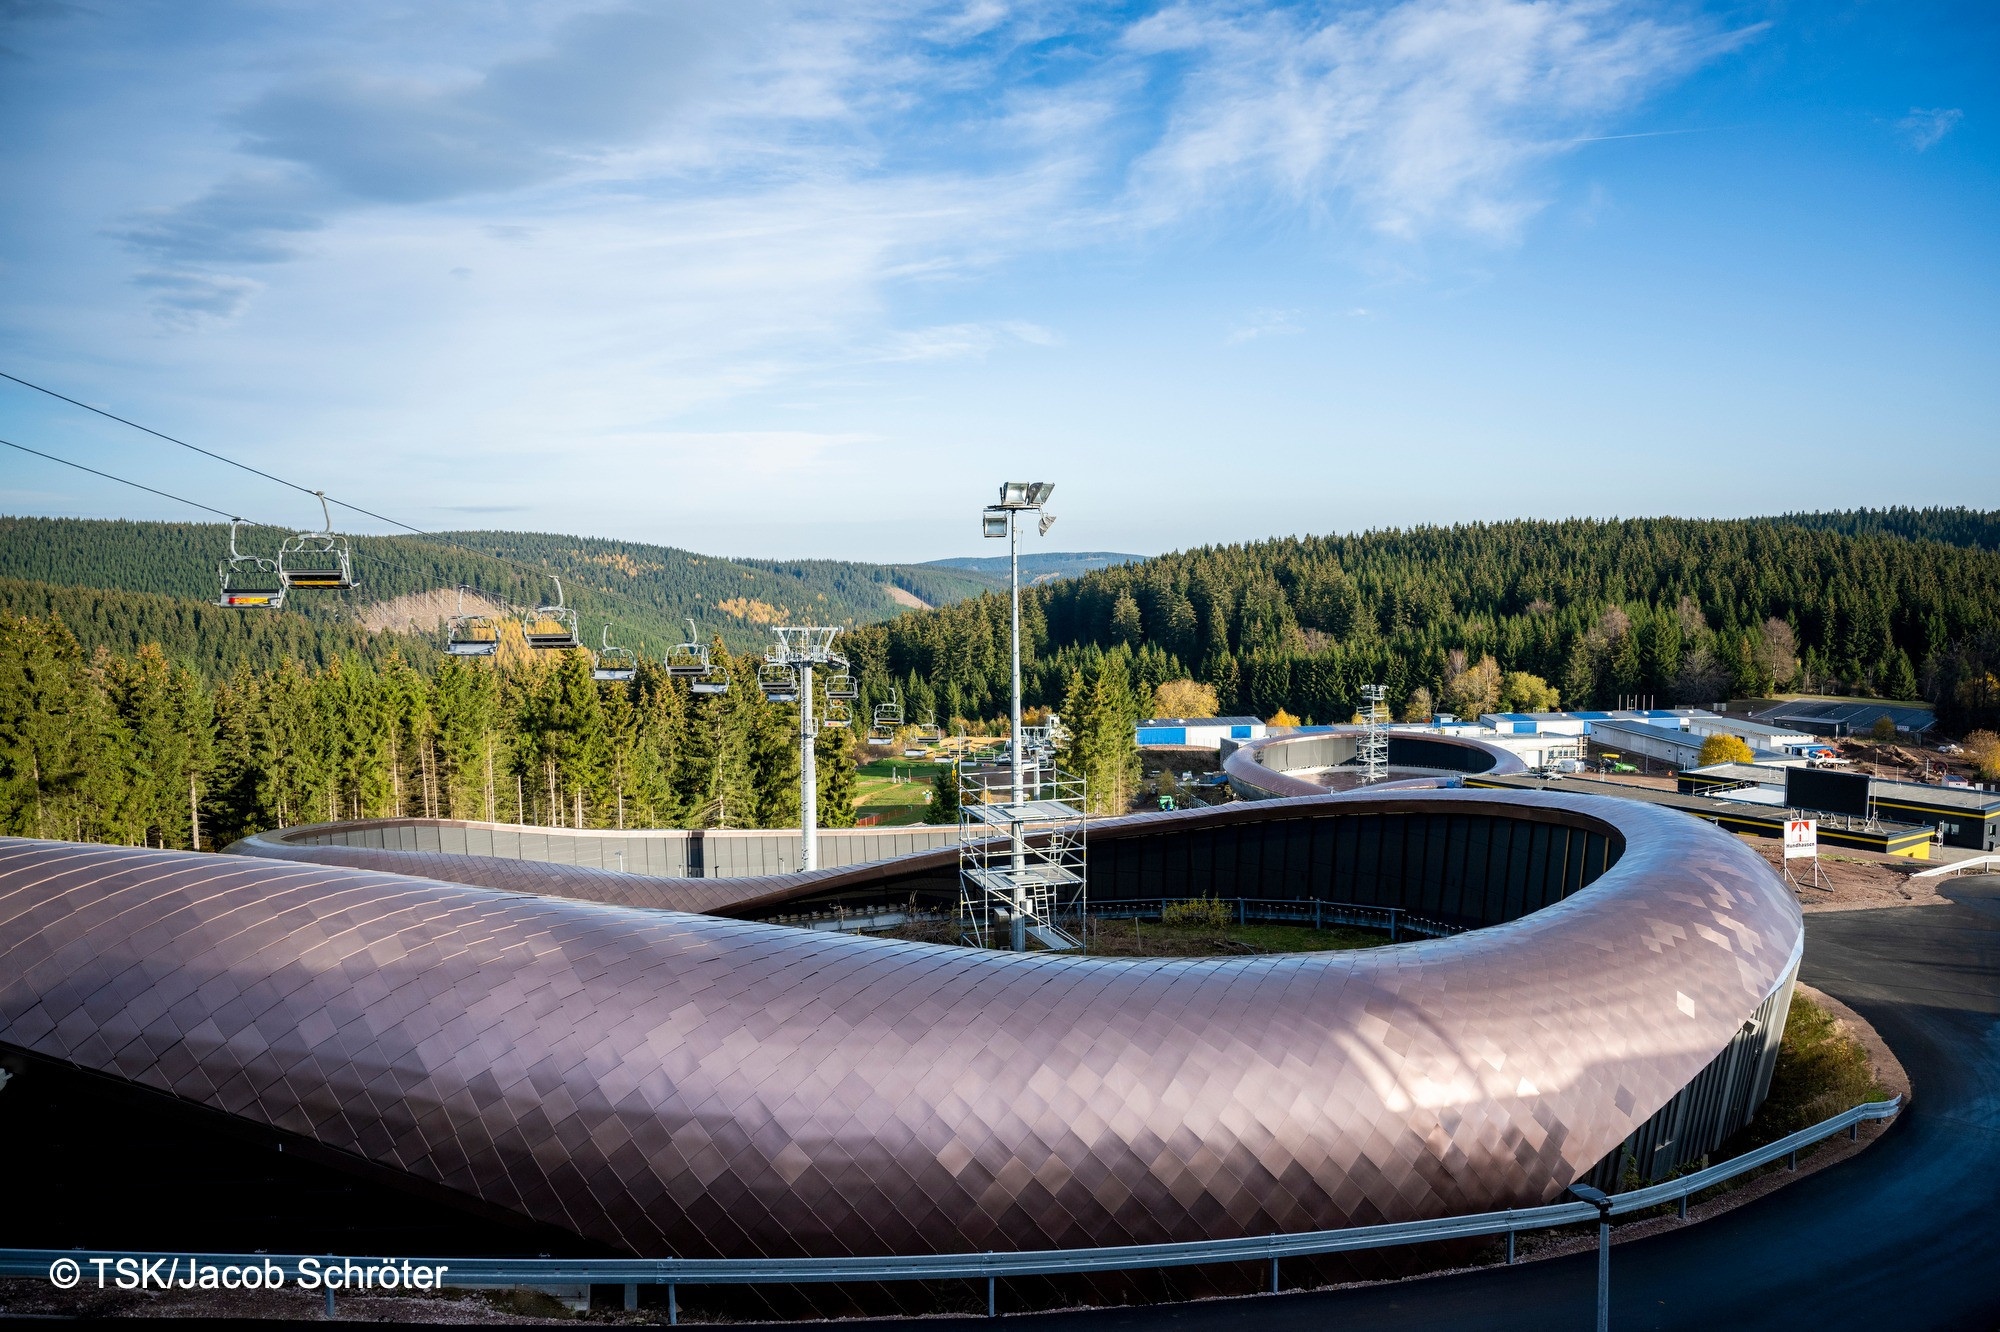 Oberhof's ice track ready for World Luge Championships after €40 million renovation